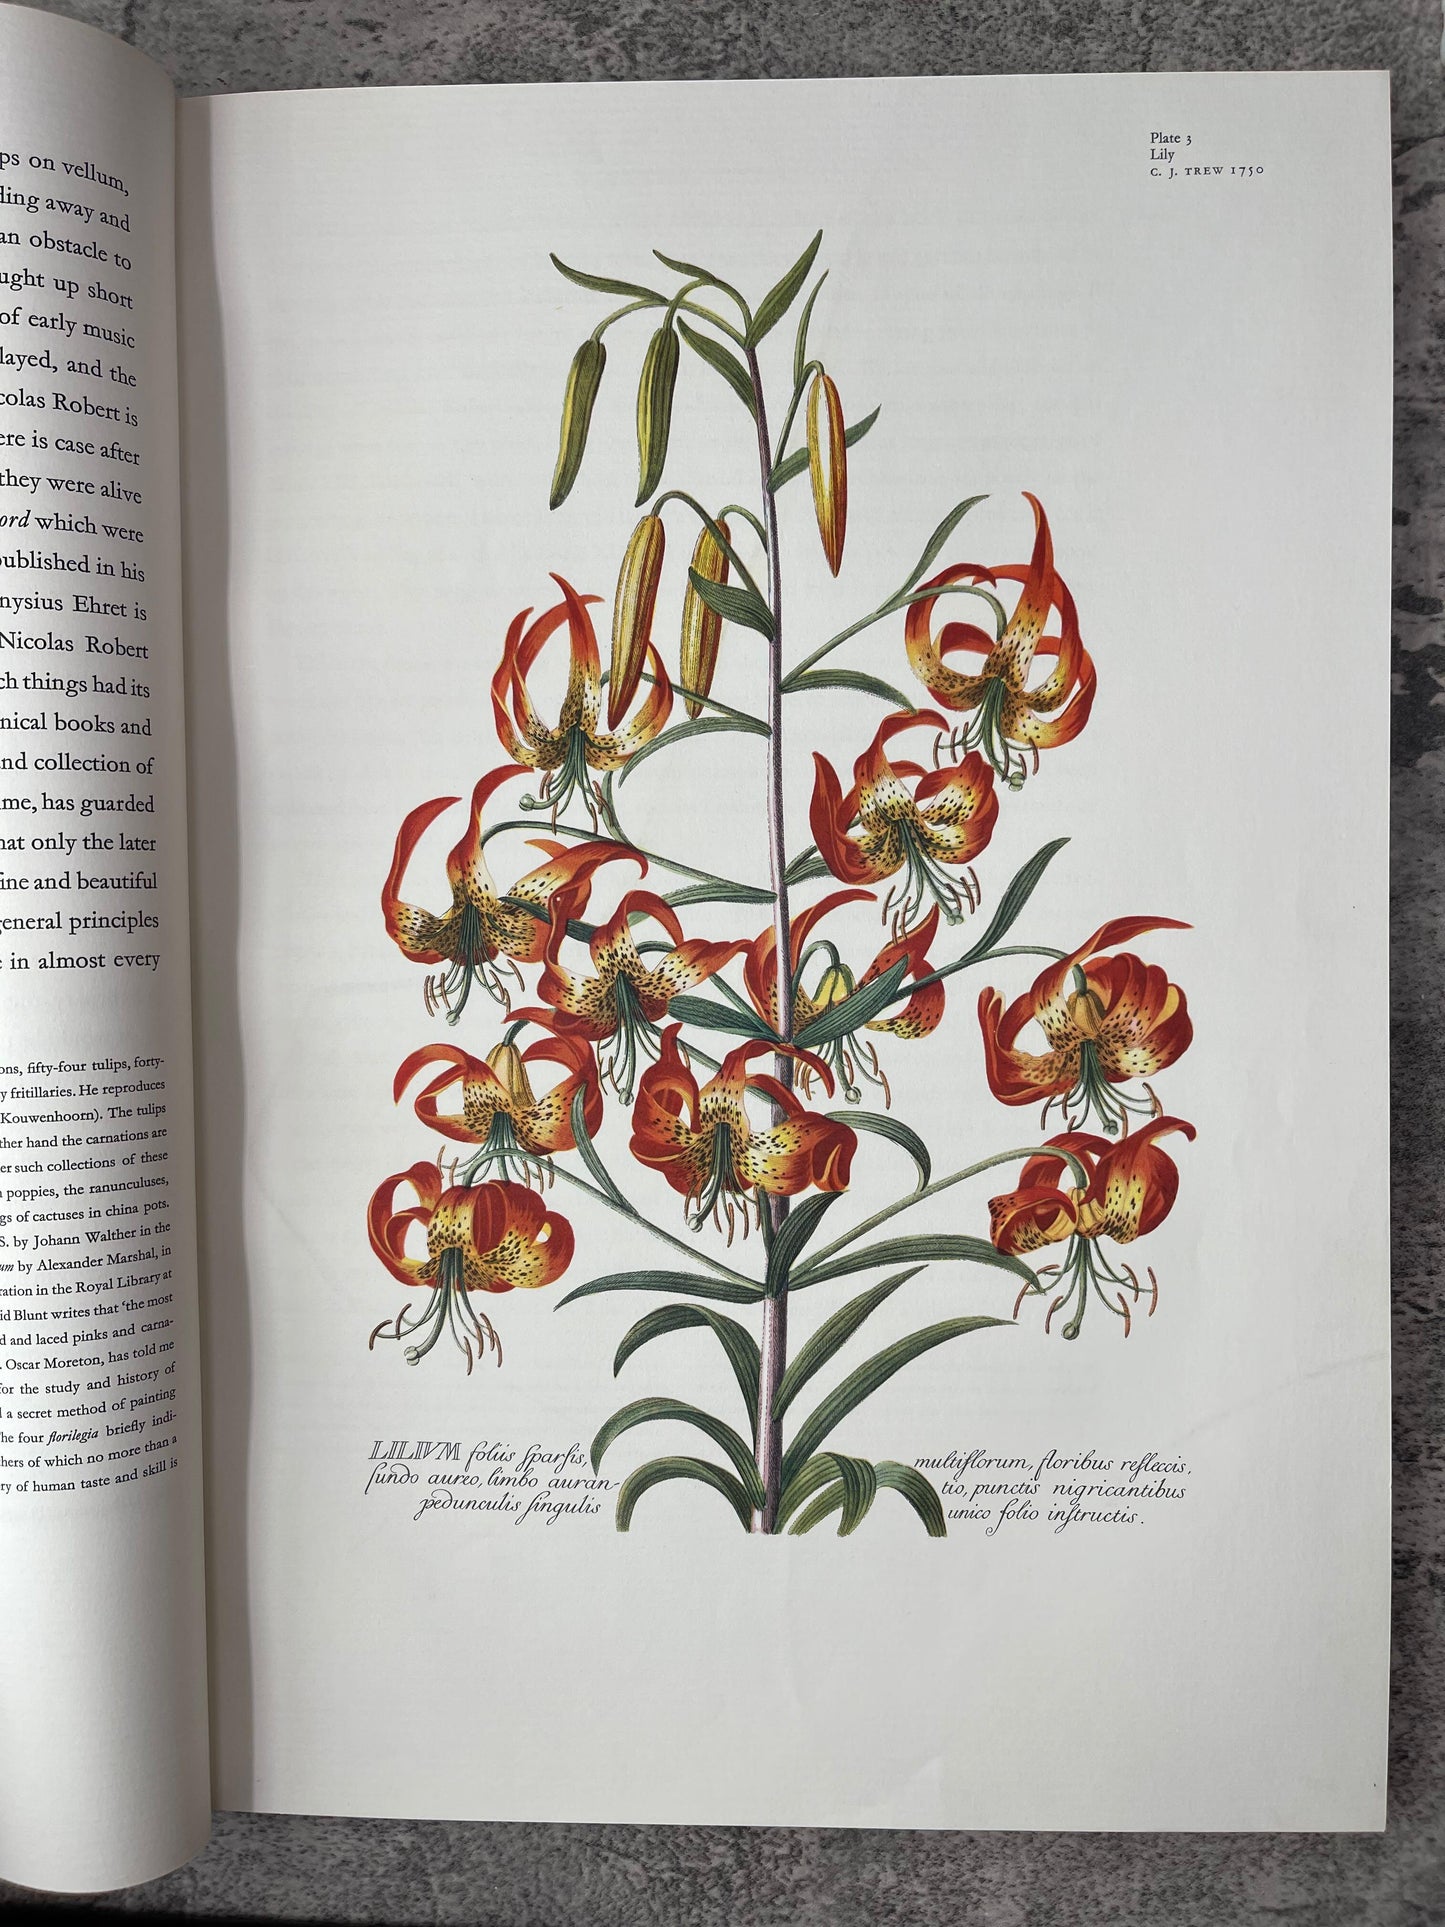 Great Flower Books 1700-1900 / Signed / 1st Limited Edition / Copy No. 42 / 1956 - Precious Cache